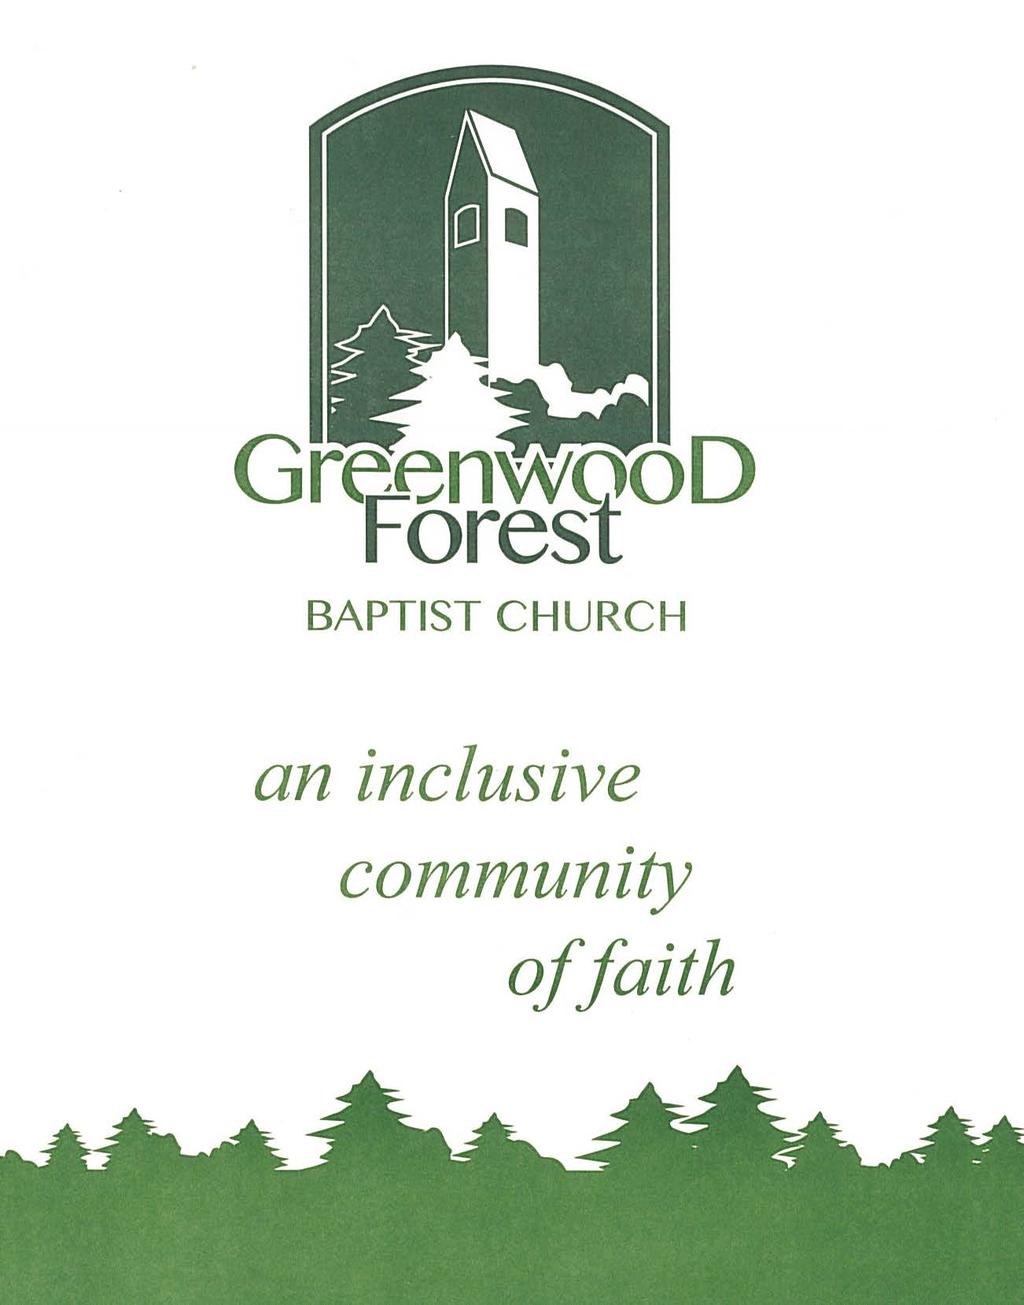 GREENWOOD FOREST BAPTIST CHURCH Transfiguration Sunday February 11, 2018 Chiming of the Hour Processional Hymn 161 Welcome to Worship See Our Lord in All His Glory Rev.